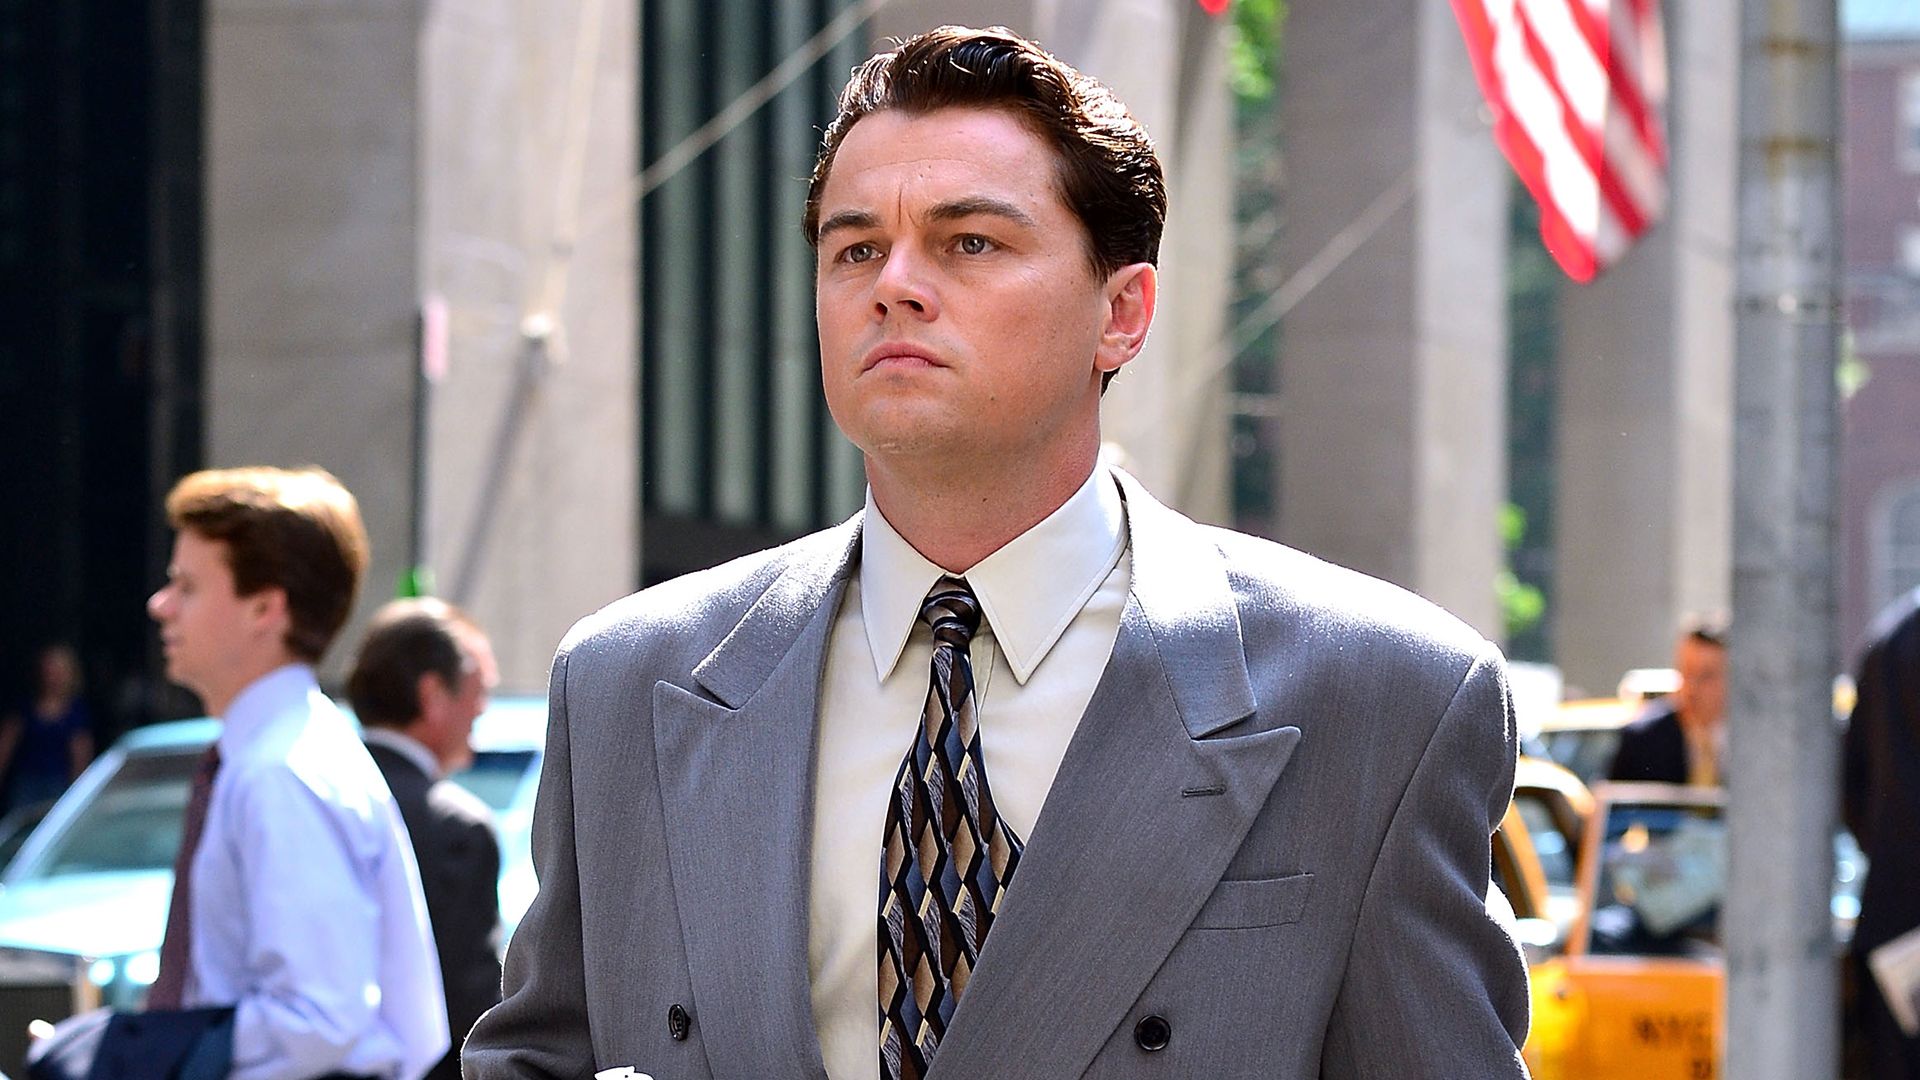 menta dorado Avispón 10 Things You May Not Know About 'The Wolf of Wall Street'